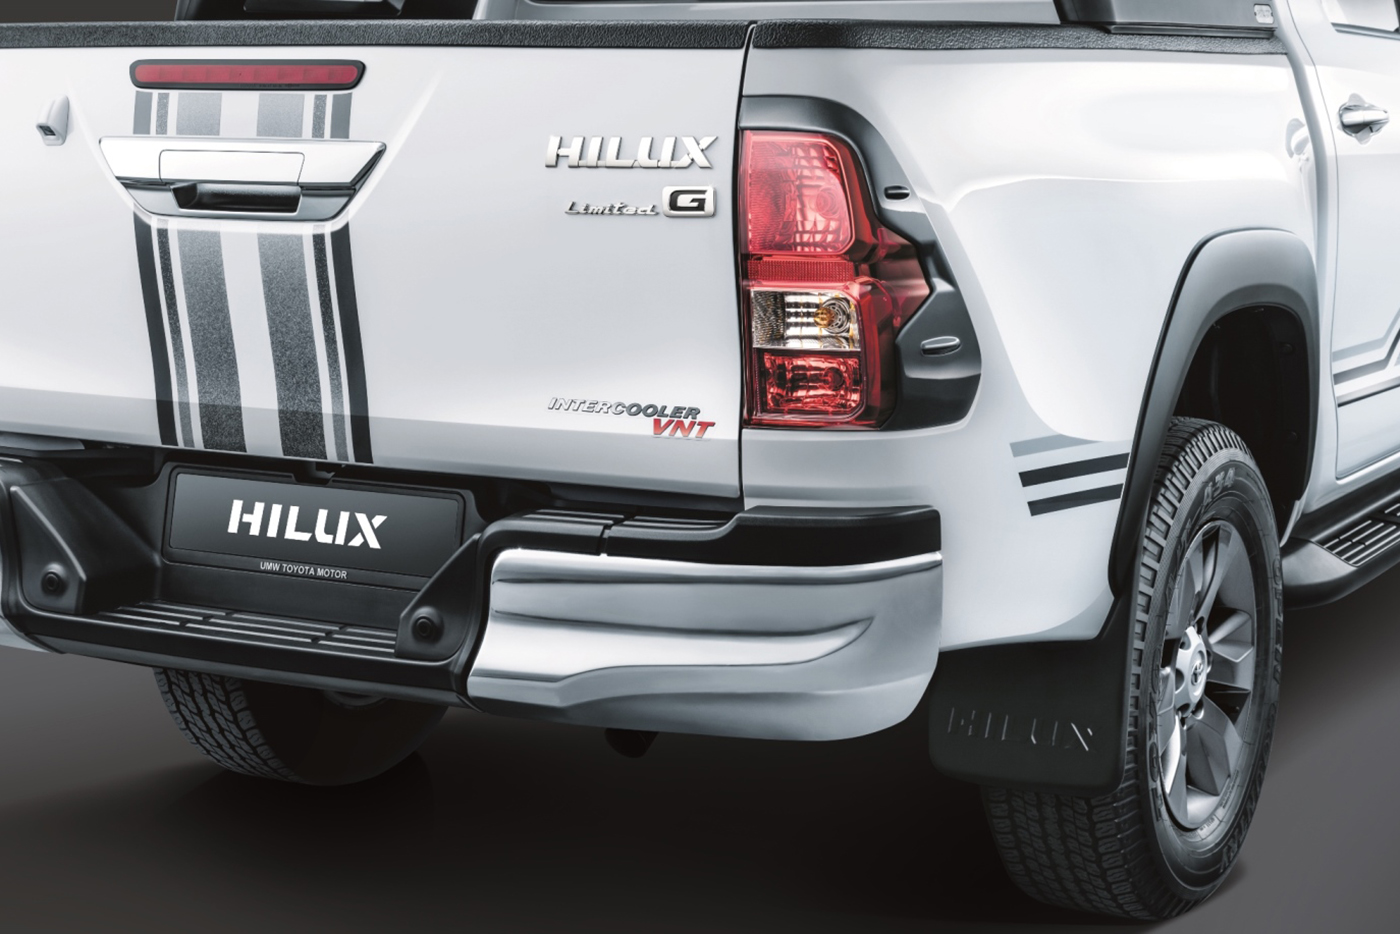 toyota-hilux-24g-limited-edition-4.jpg